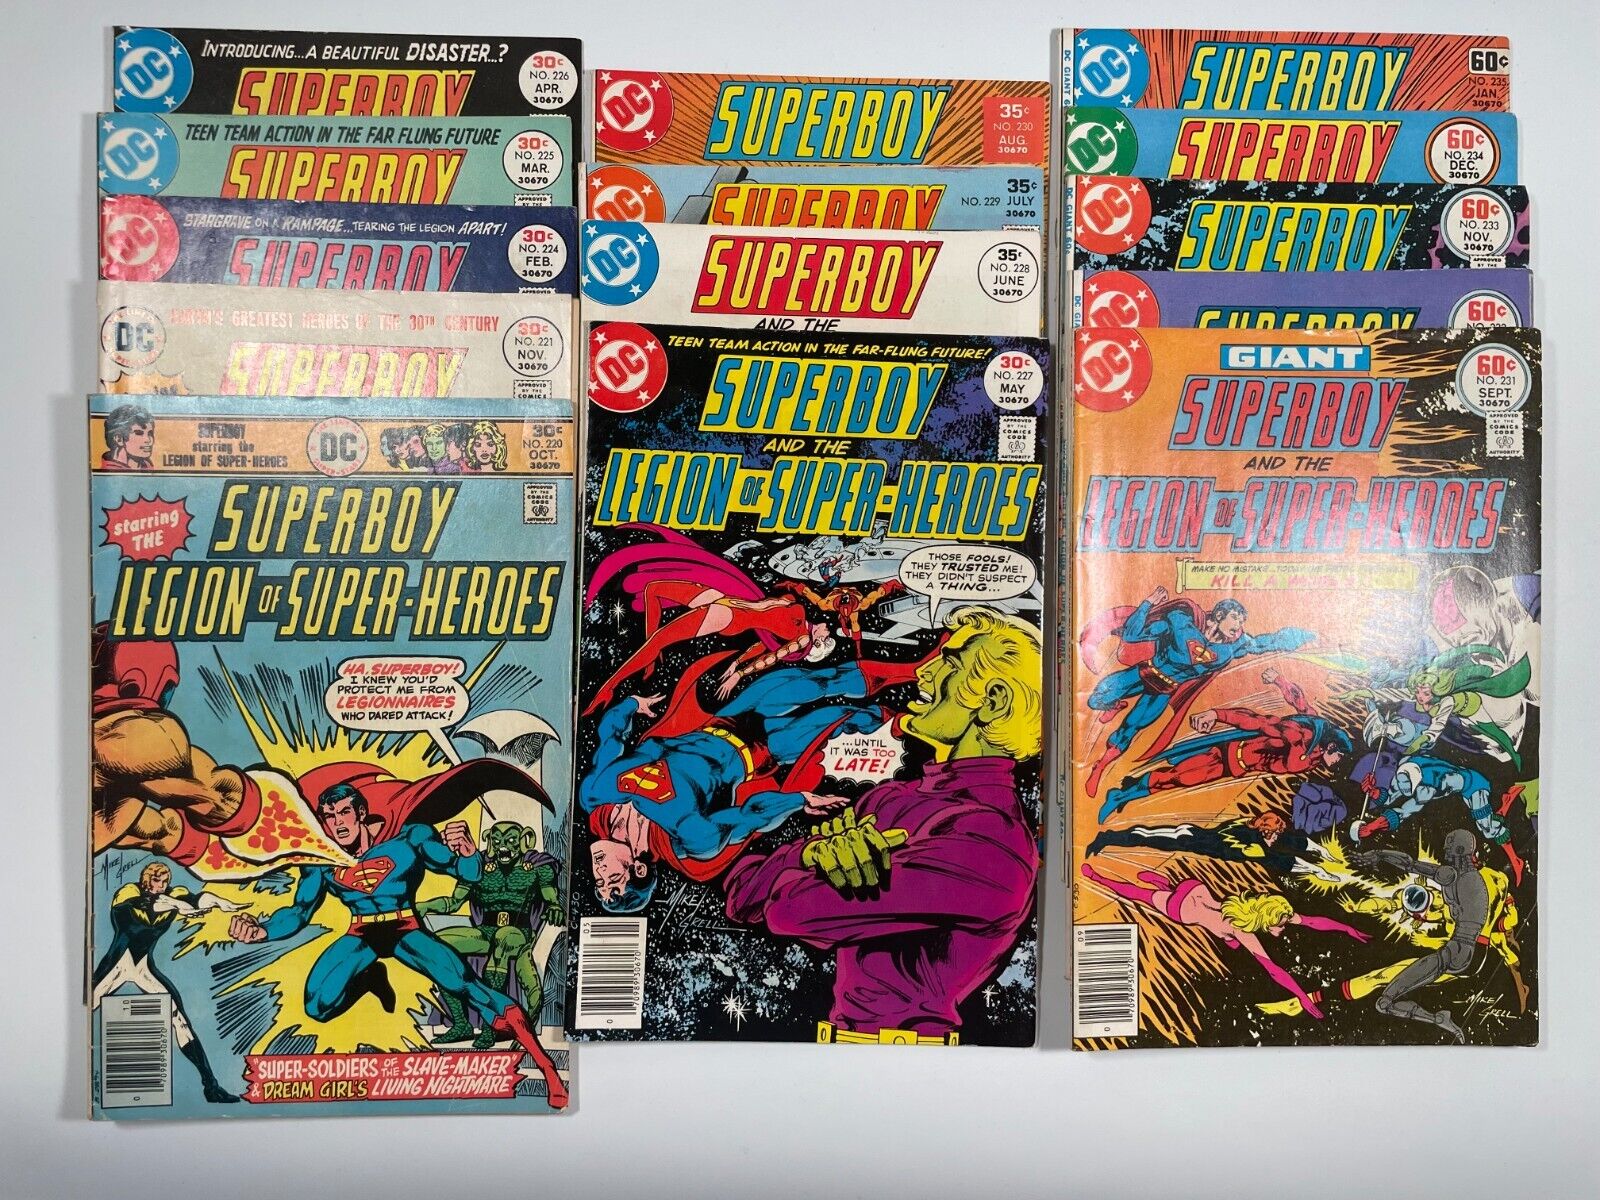 Superboy and the Legion of Super-Heroes #220, 221, 224-235 - 1976 - Lot of 14